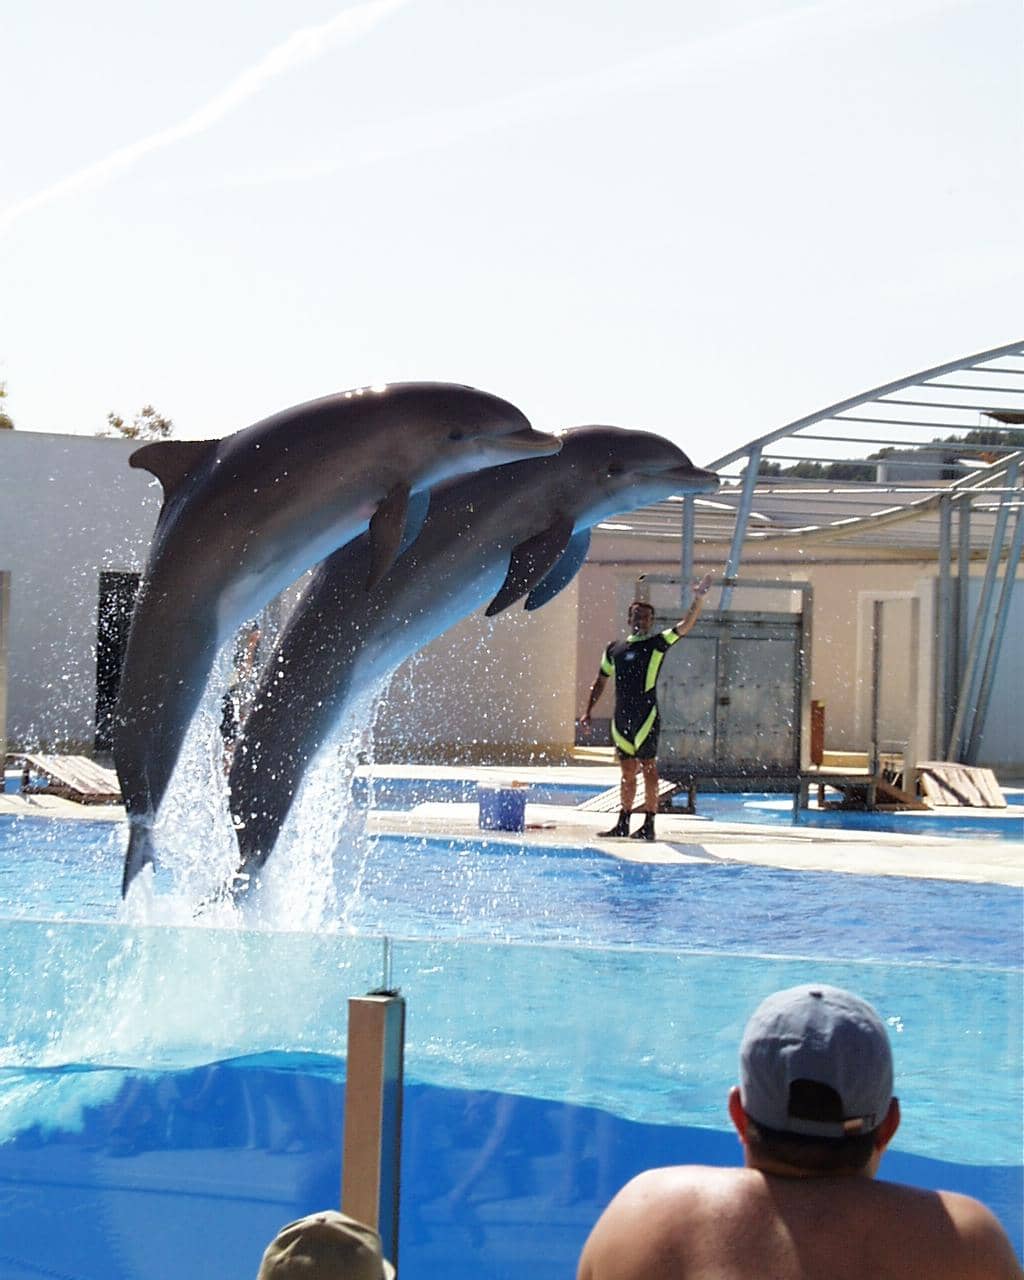 Dolphin leap image before removal of man and boy